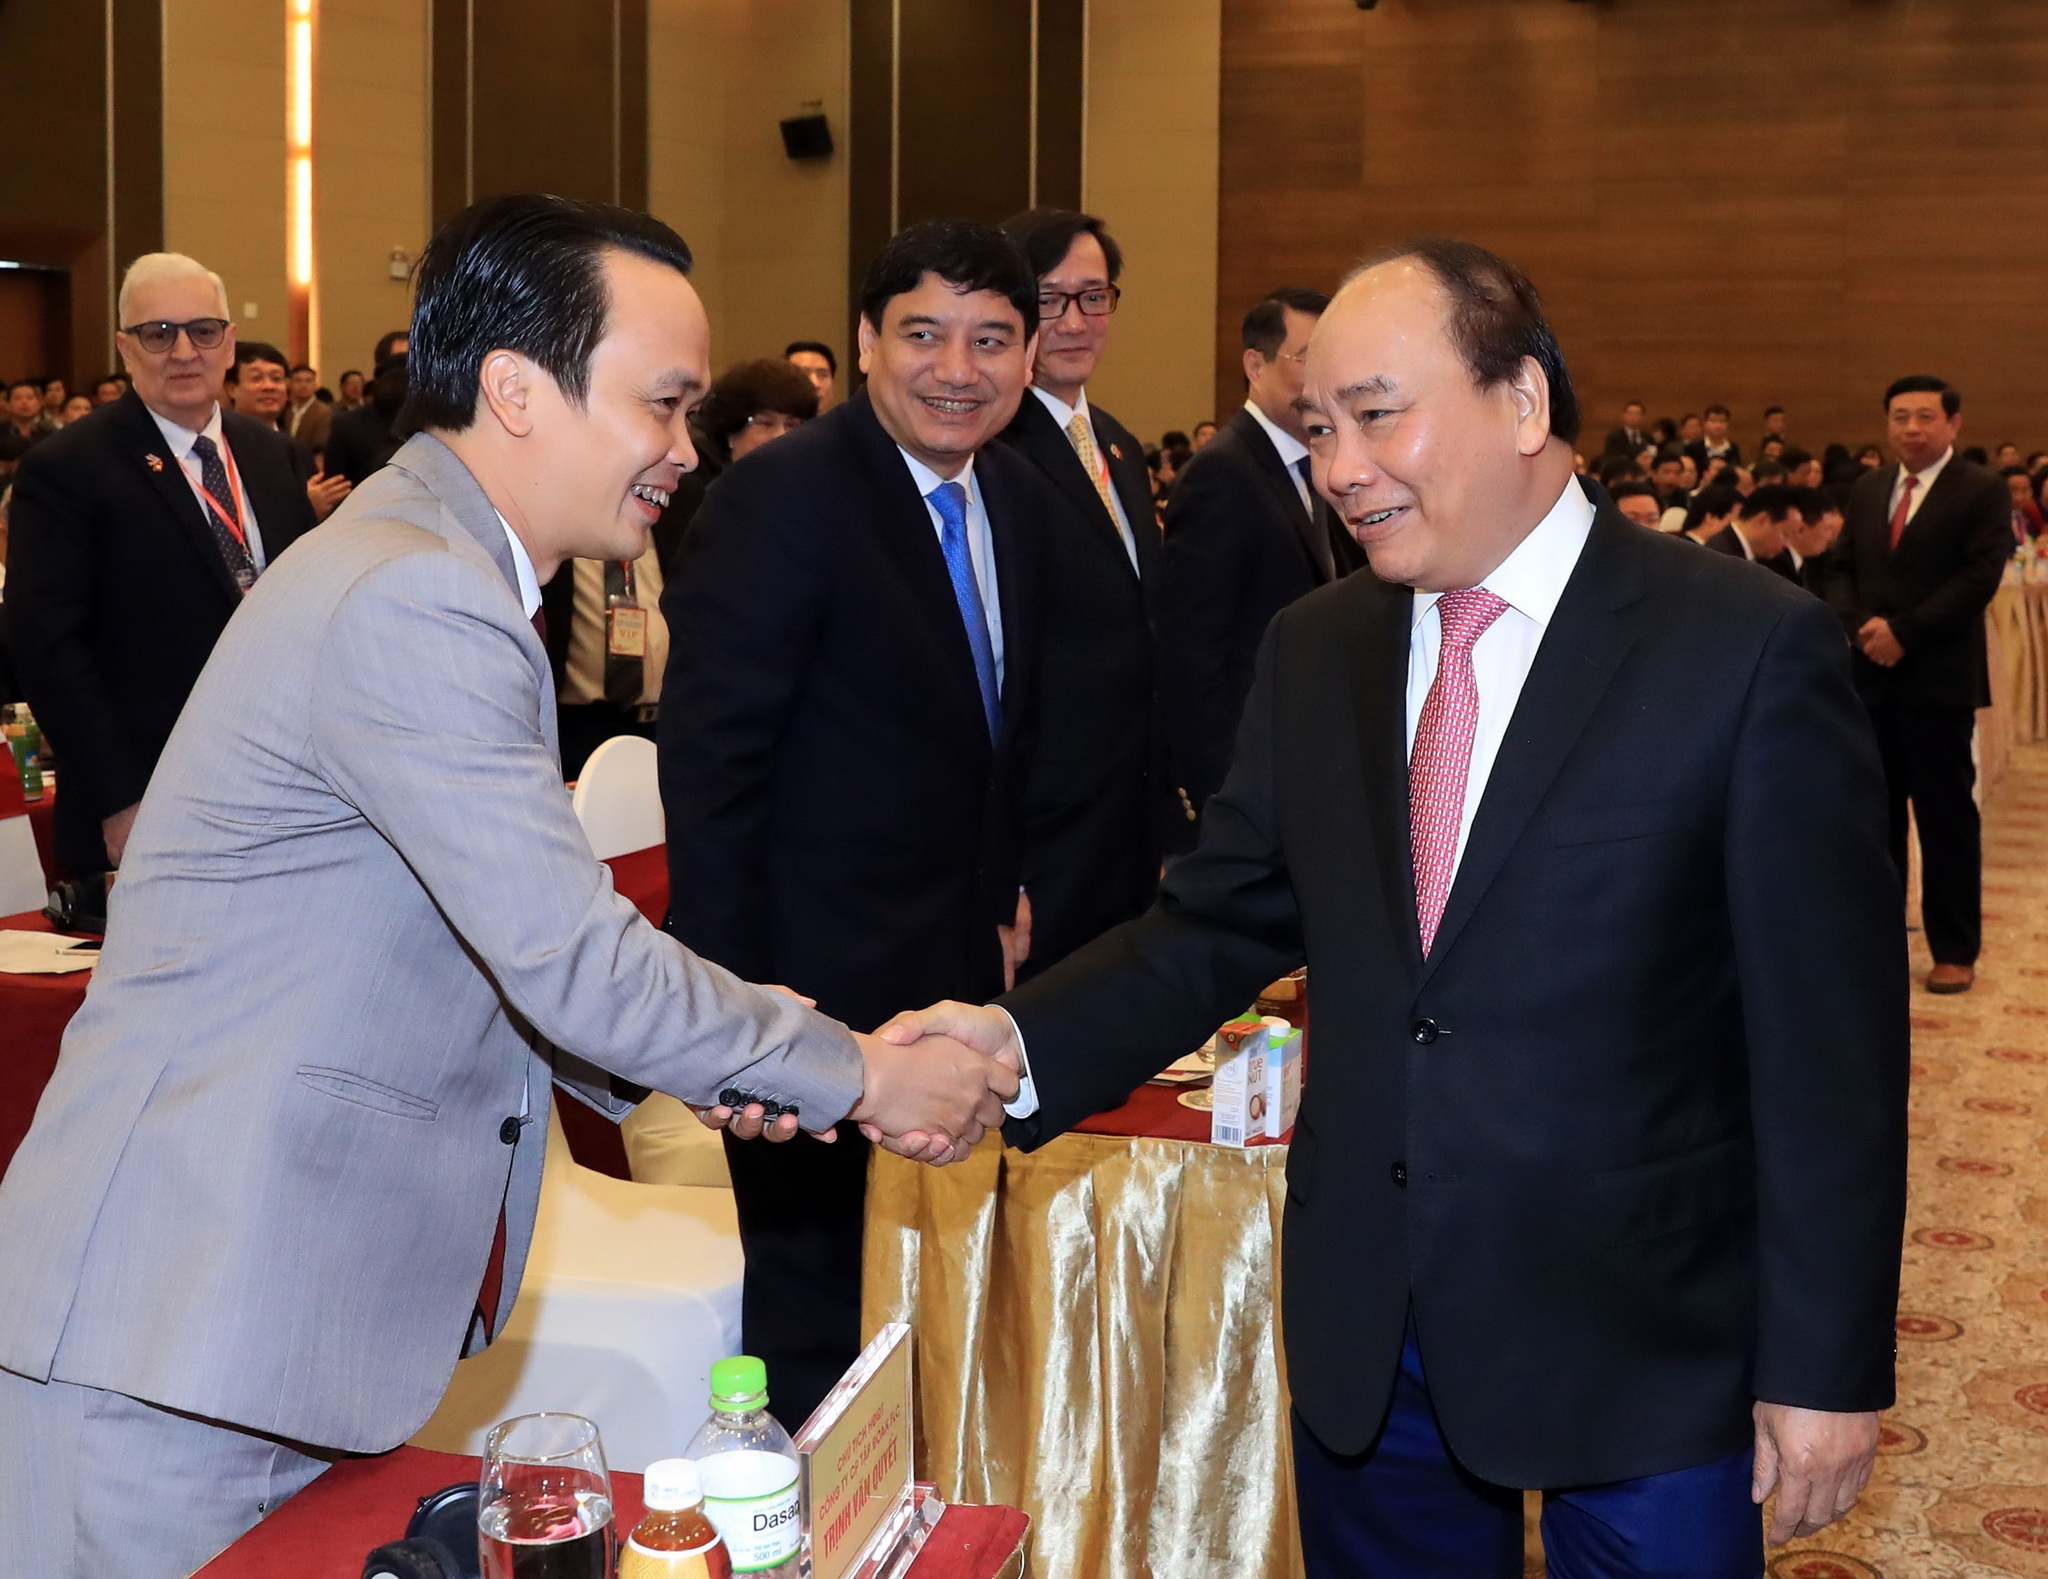 Prime Minister Nguyen Xuan Phuc (R) shakes hands with a delegate to the get-together (Source: VietnamPlus)